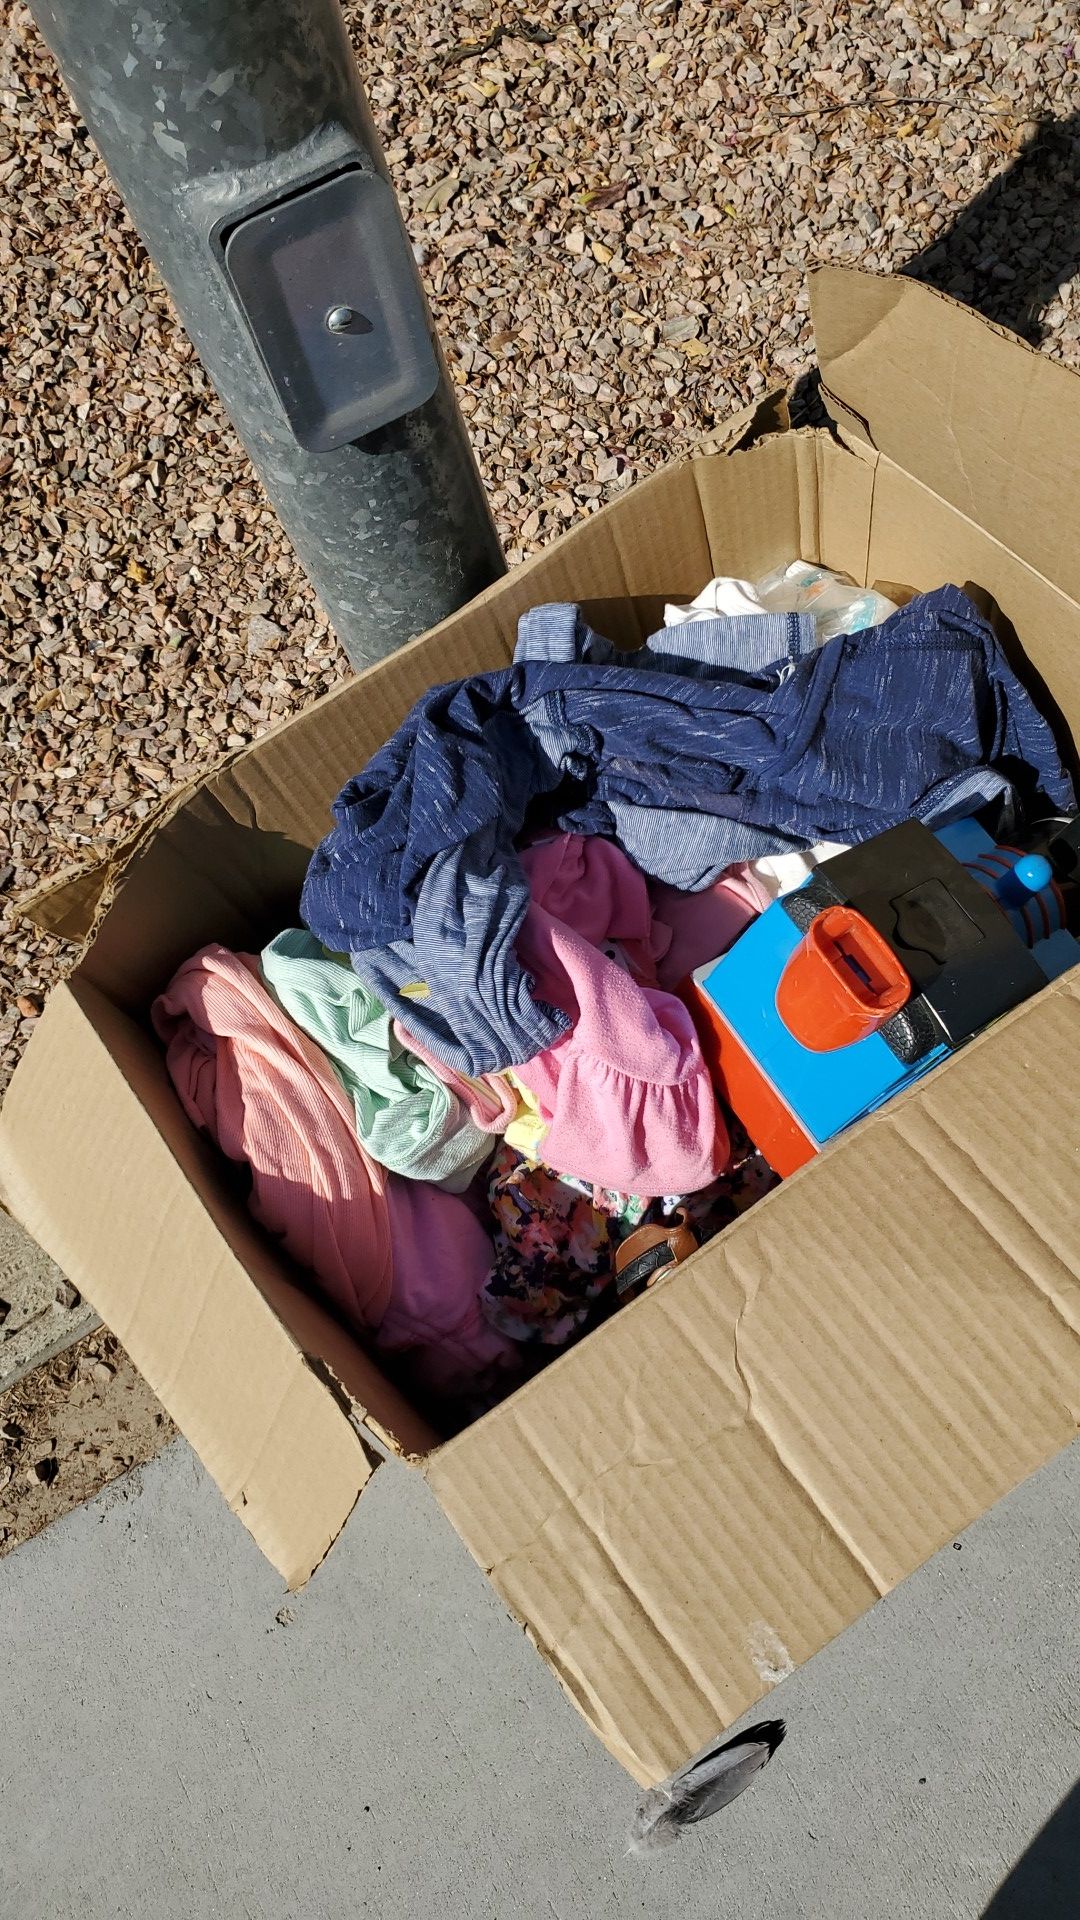 Free baby clothes